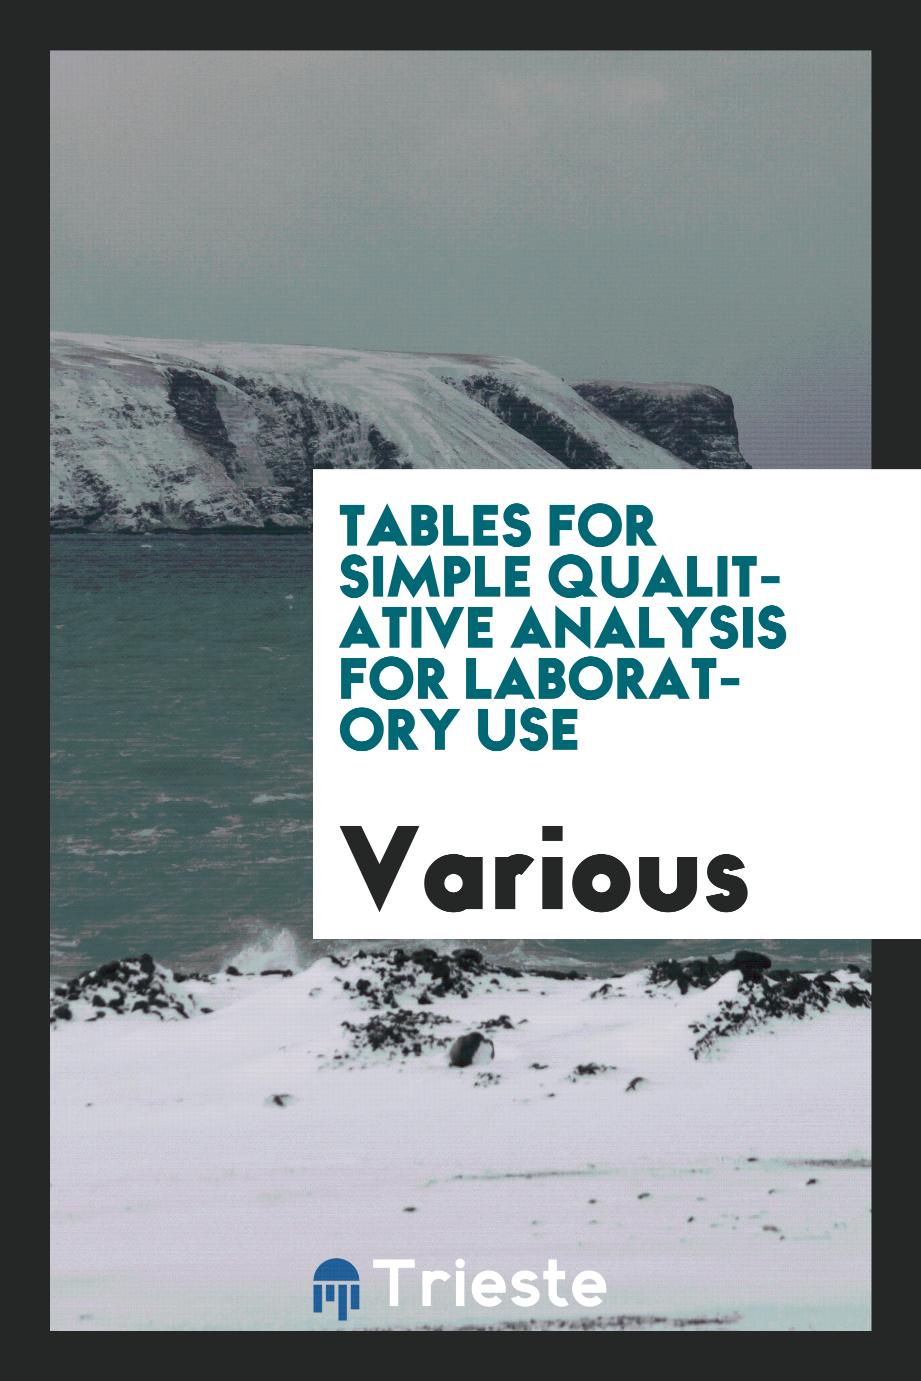 Tables for simple qualitative analysis for laboratory use